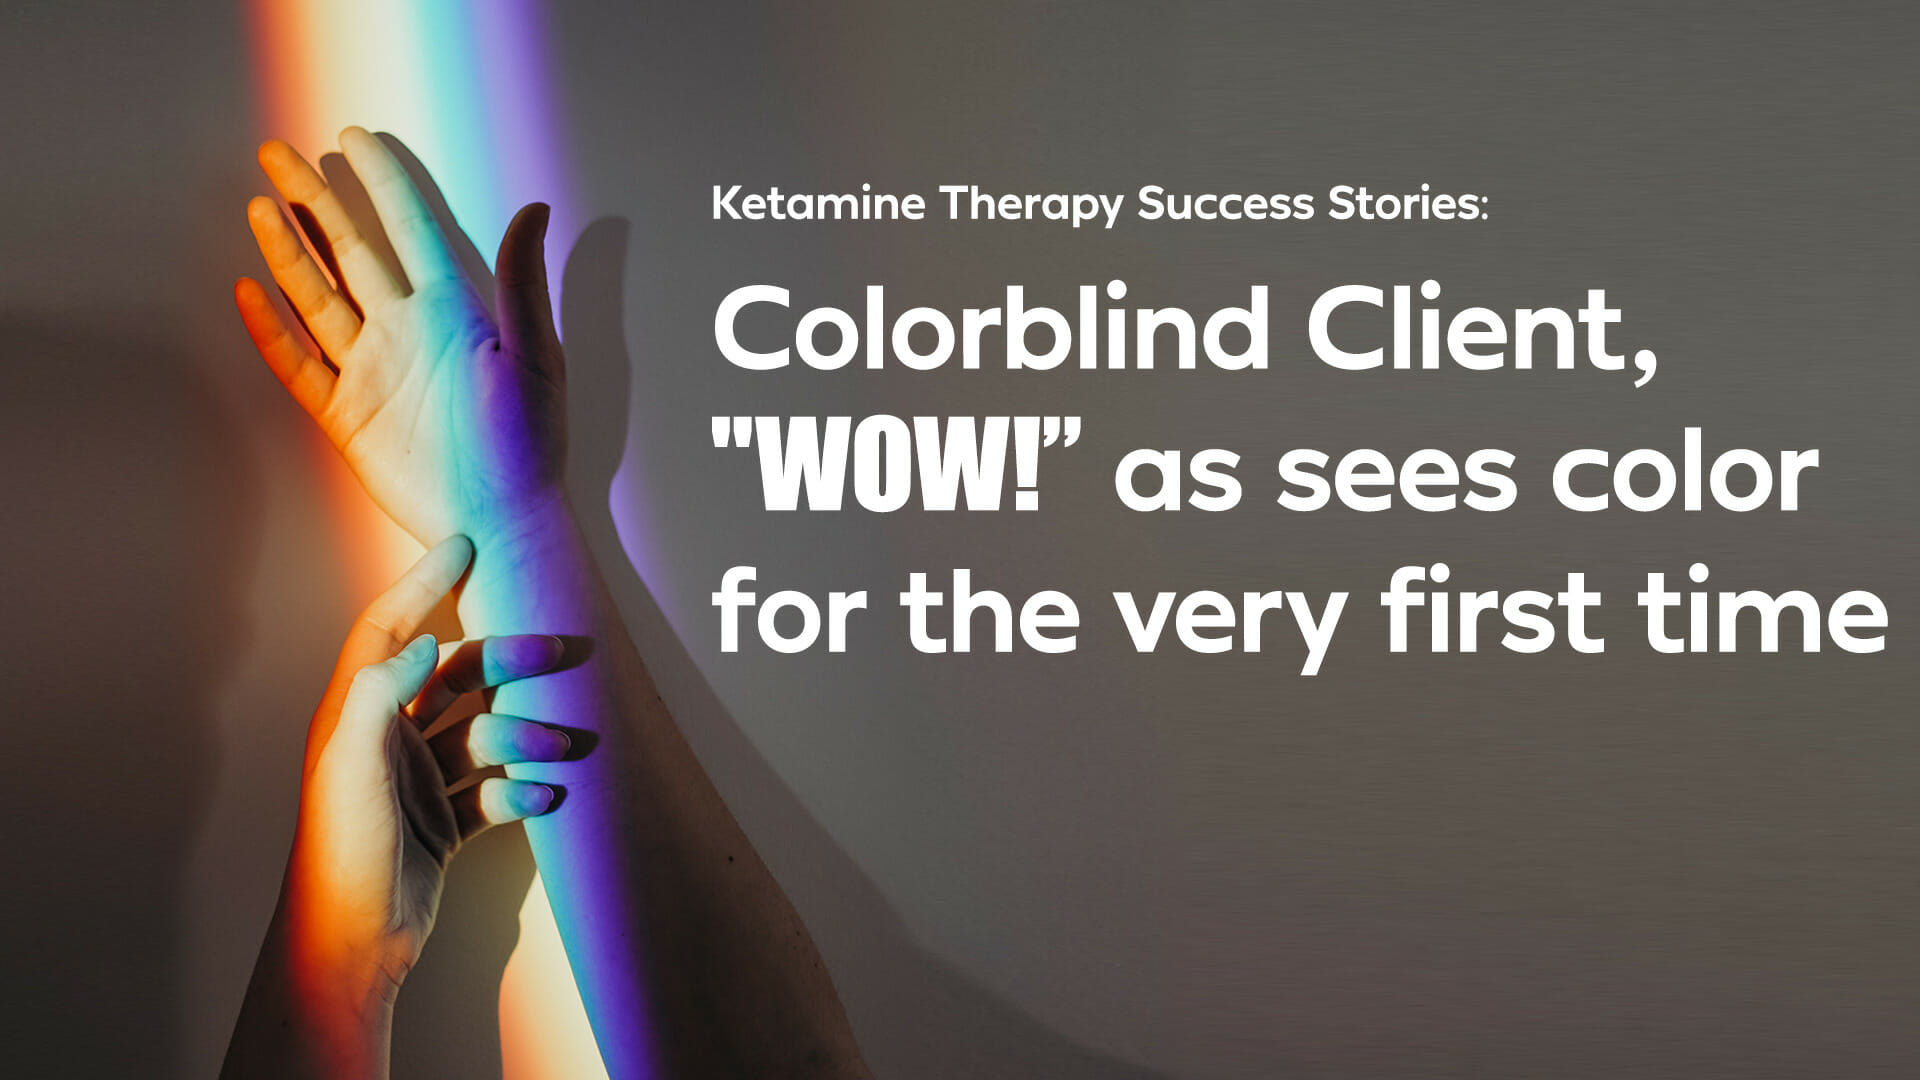 Ketamine Therapy Success Stories: Colorblind Client sees color for the first time